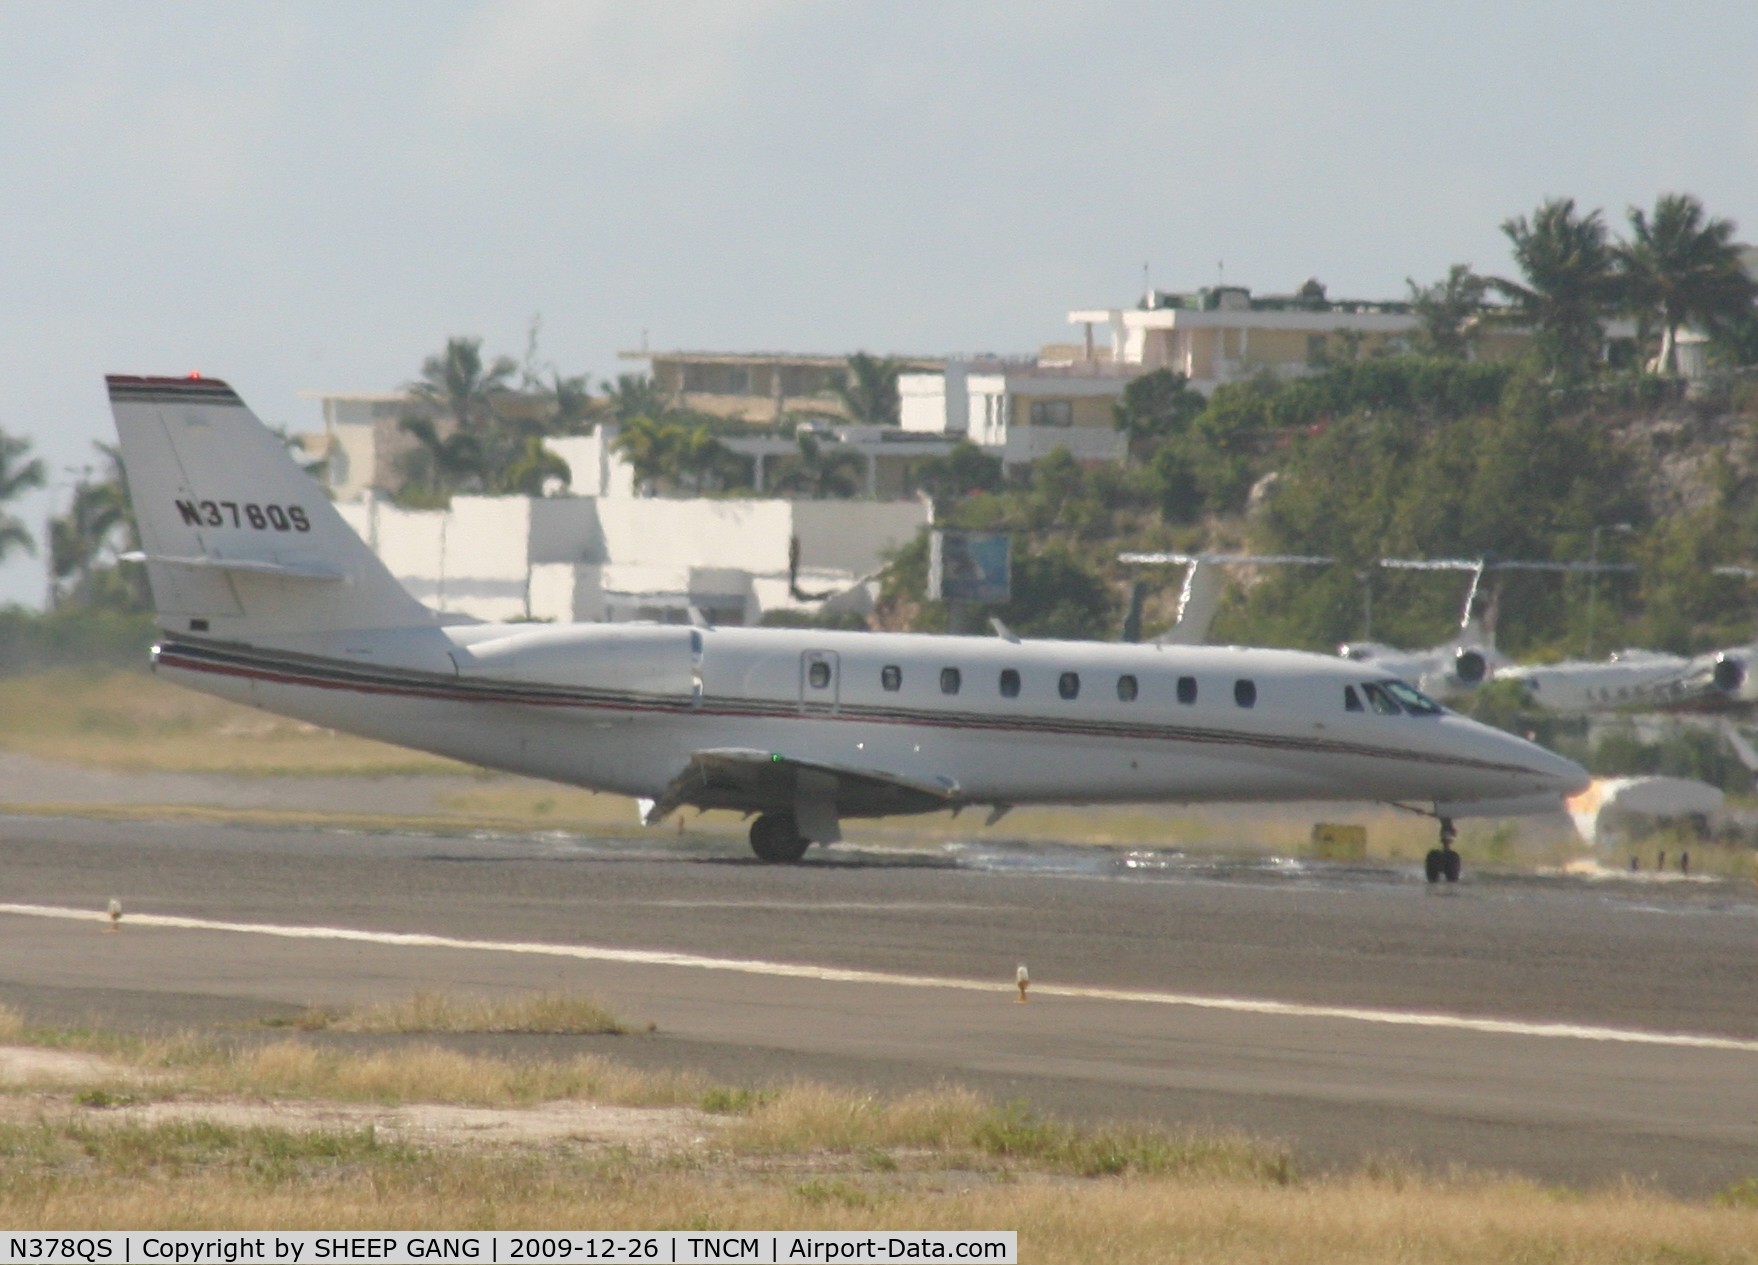 N378QS, 2006 Cessna 680 Citation Sovereign C/N 680-0103, N378QS back tracking the runway fro parking